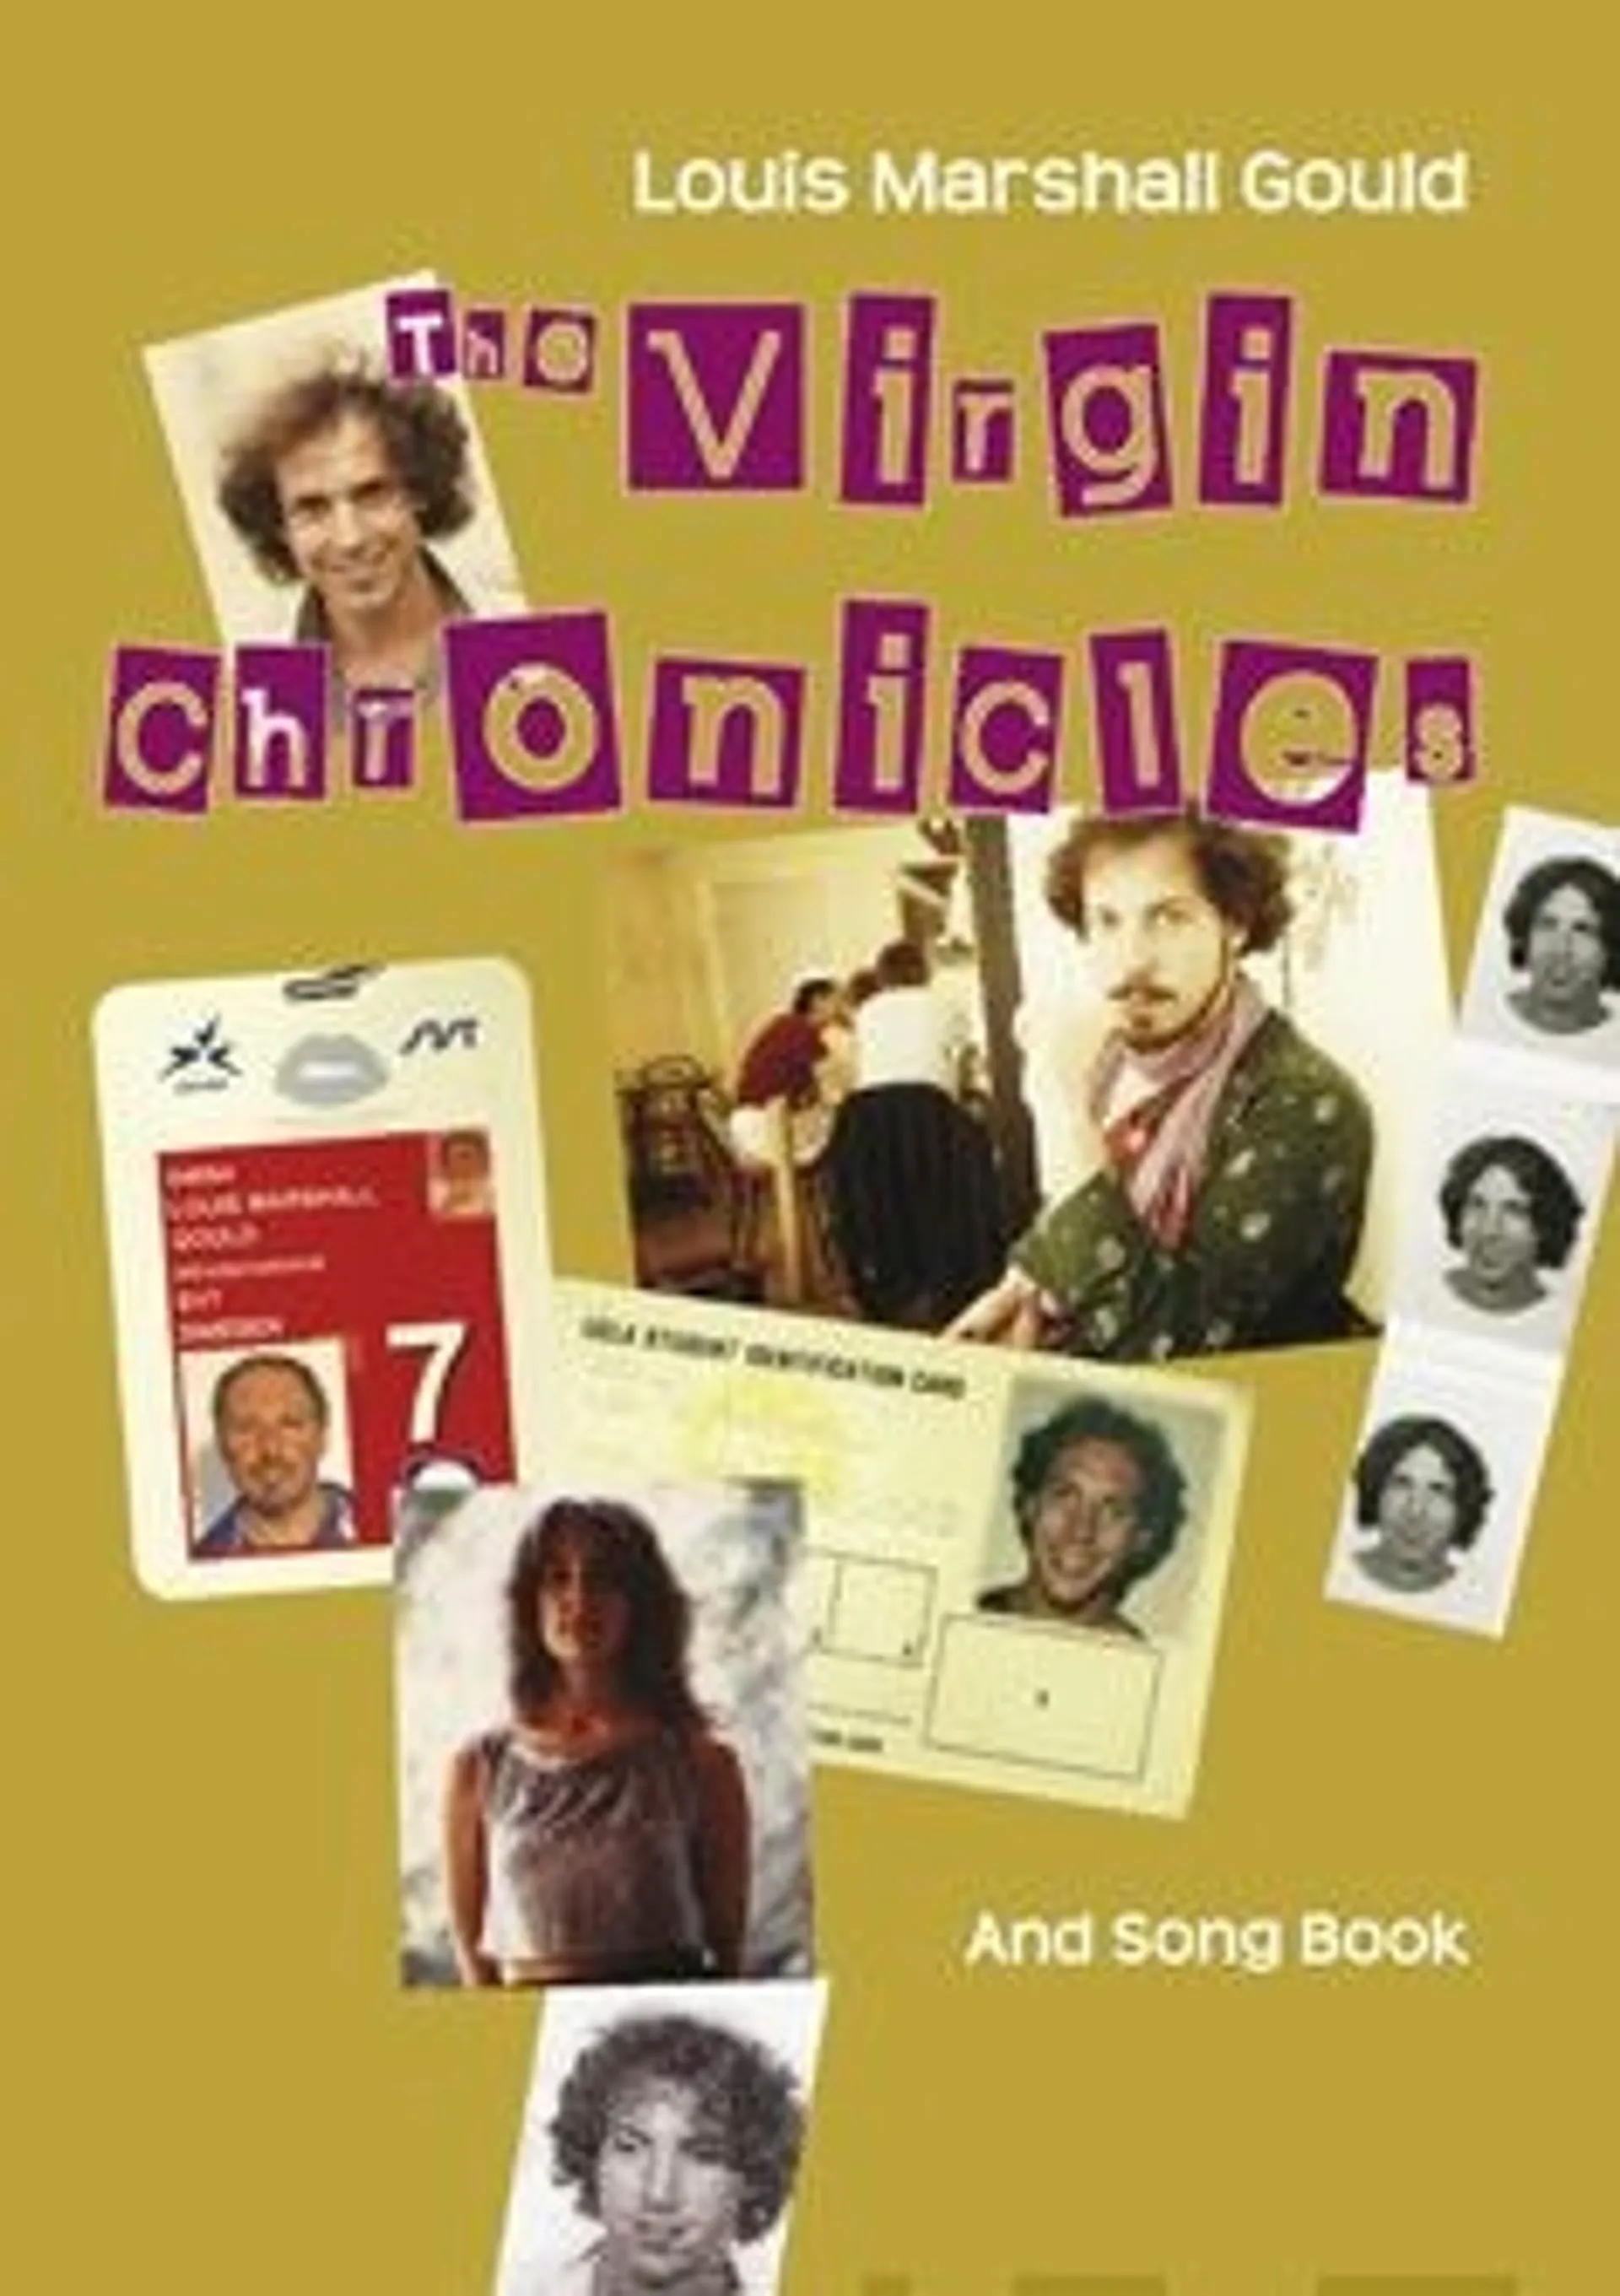 Marshall Gould, The Virgin Chronicles and Song Book